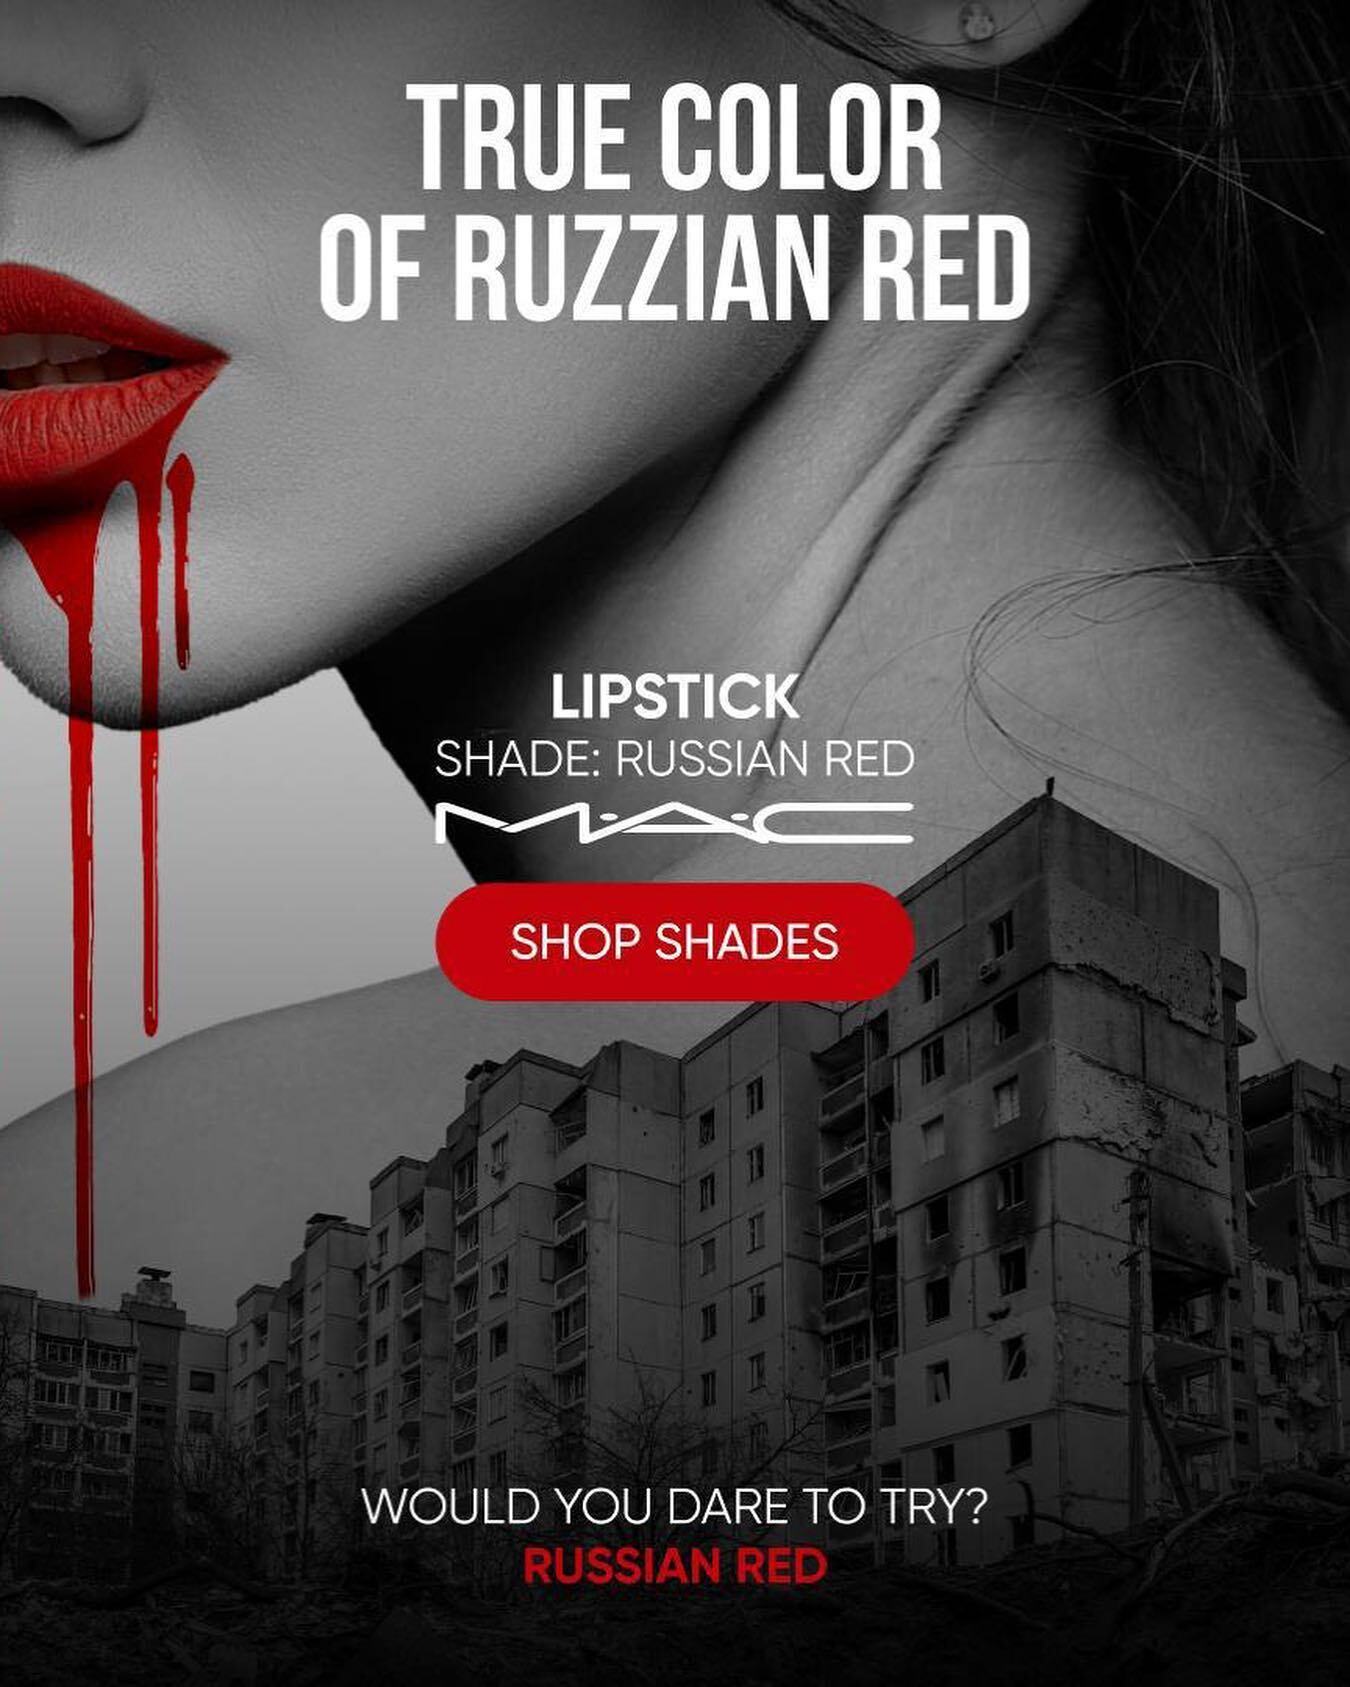 ''This is not a shade, but the blood of Ukrainians.'' The Ministry of Foreign Affairs of Ukraine addressed the world through the Russian Red lipstick by MAC Cosmetics